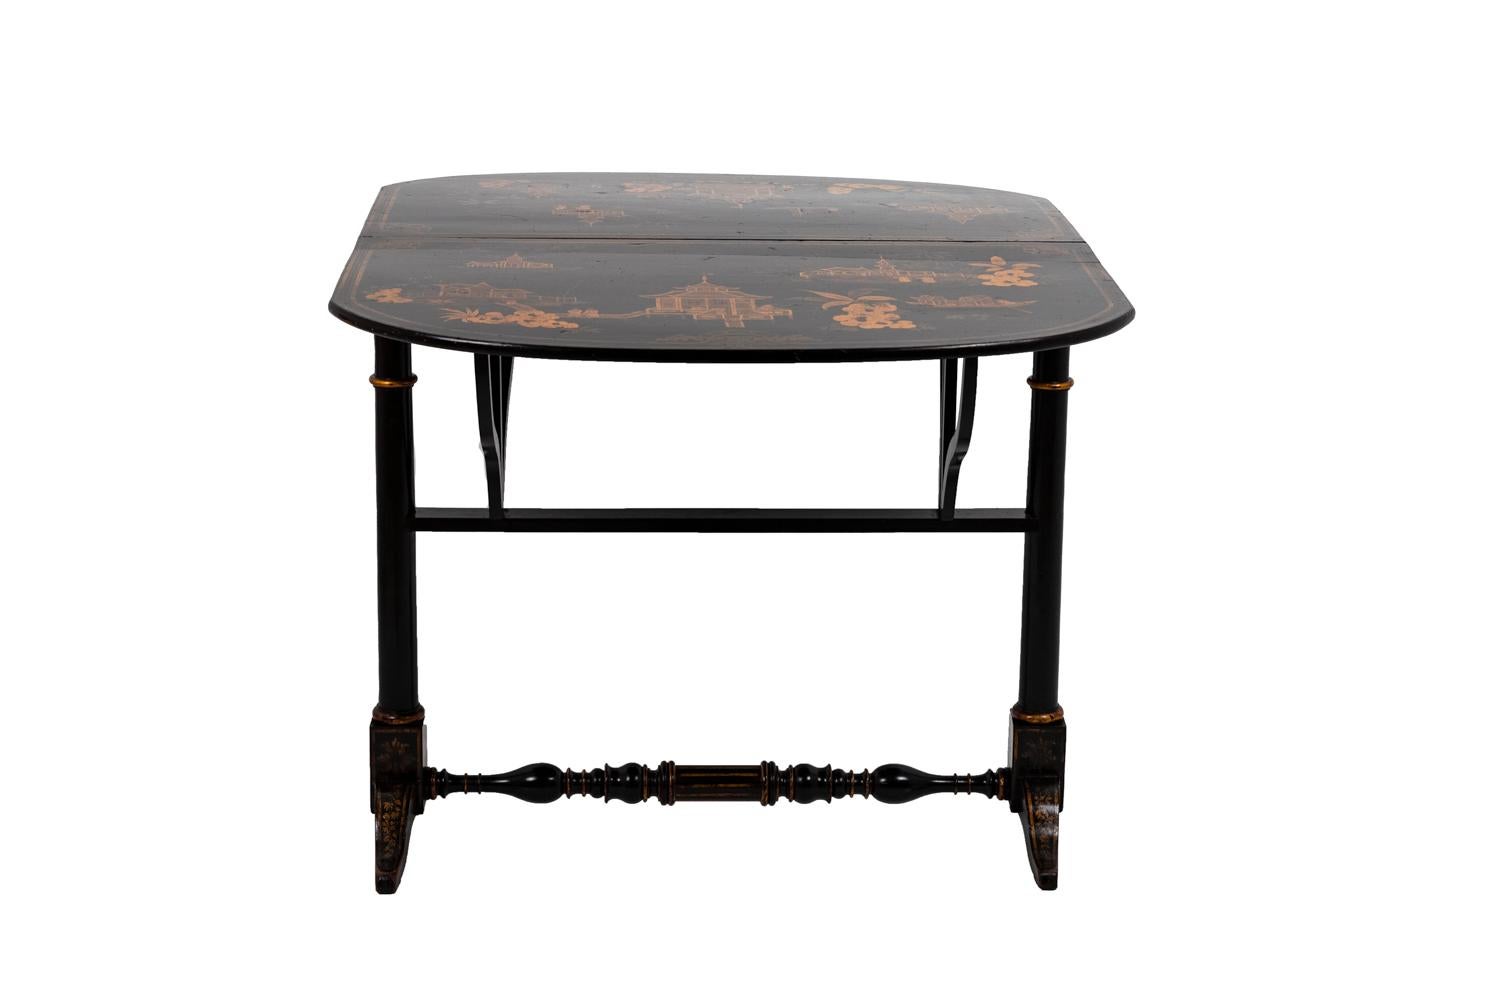 Chinese style leaf table in black lacquered wood with a gilt decor. Two leaves adorned with large cartouches framing Chinese-style landscape scenes with pagodas, junks, etc. They stand on two biped straight legs linked by a molded stud. Central